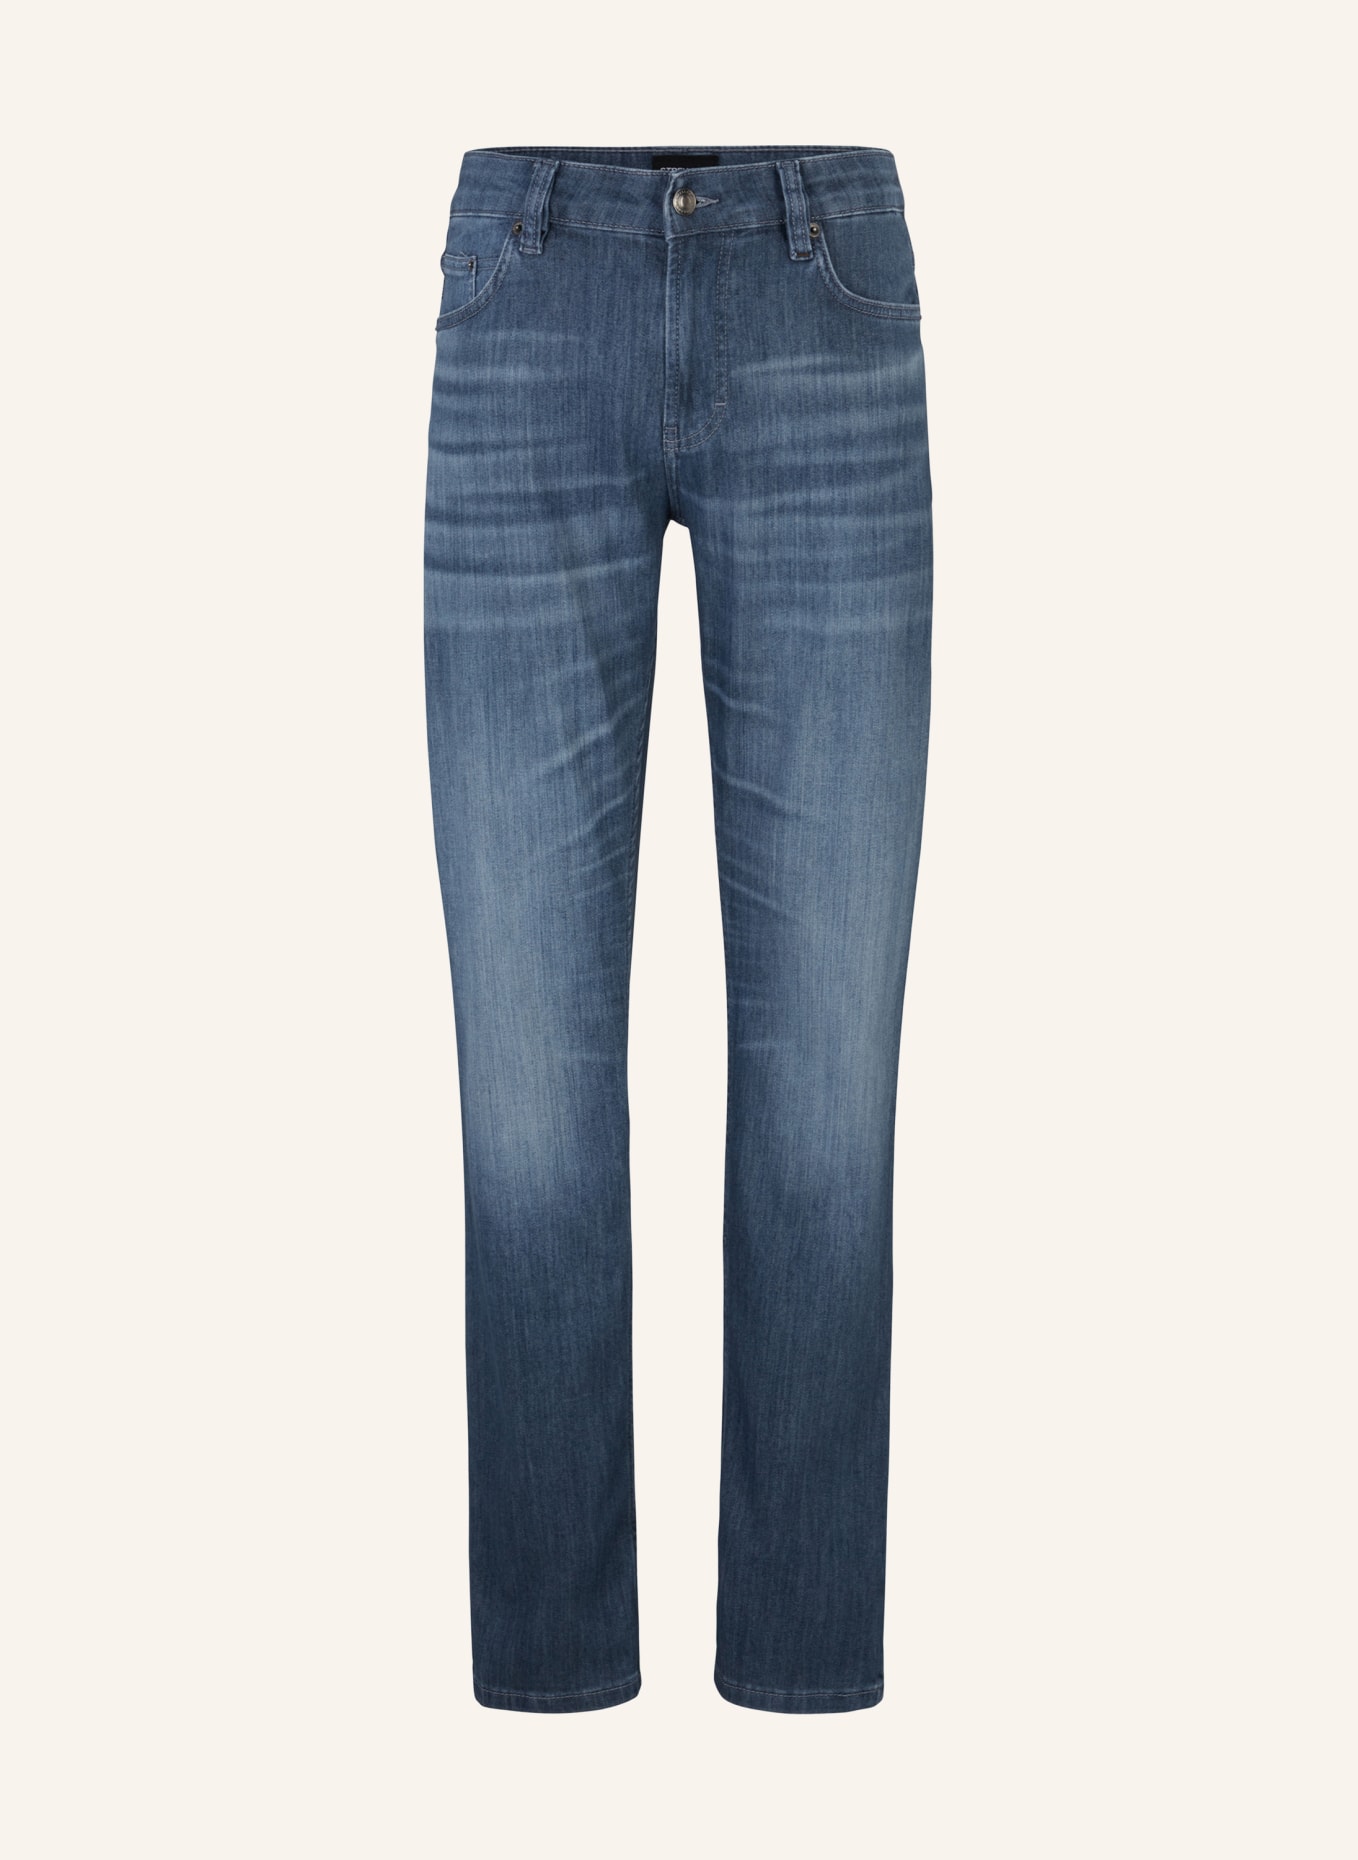 STRELLSON Jeans JEANS LIAM, NAVY WASHED, Farbe: NAVY (Bild 1)